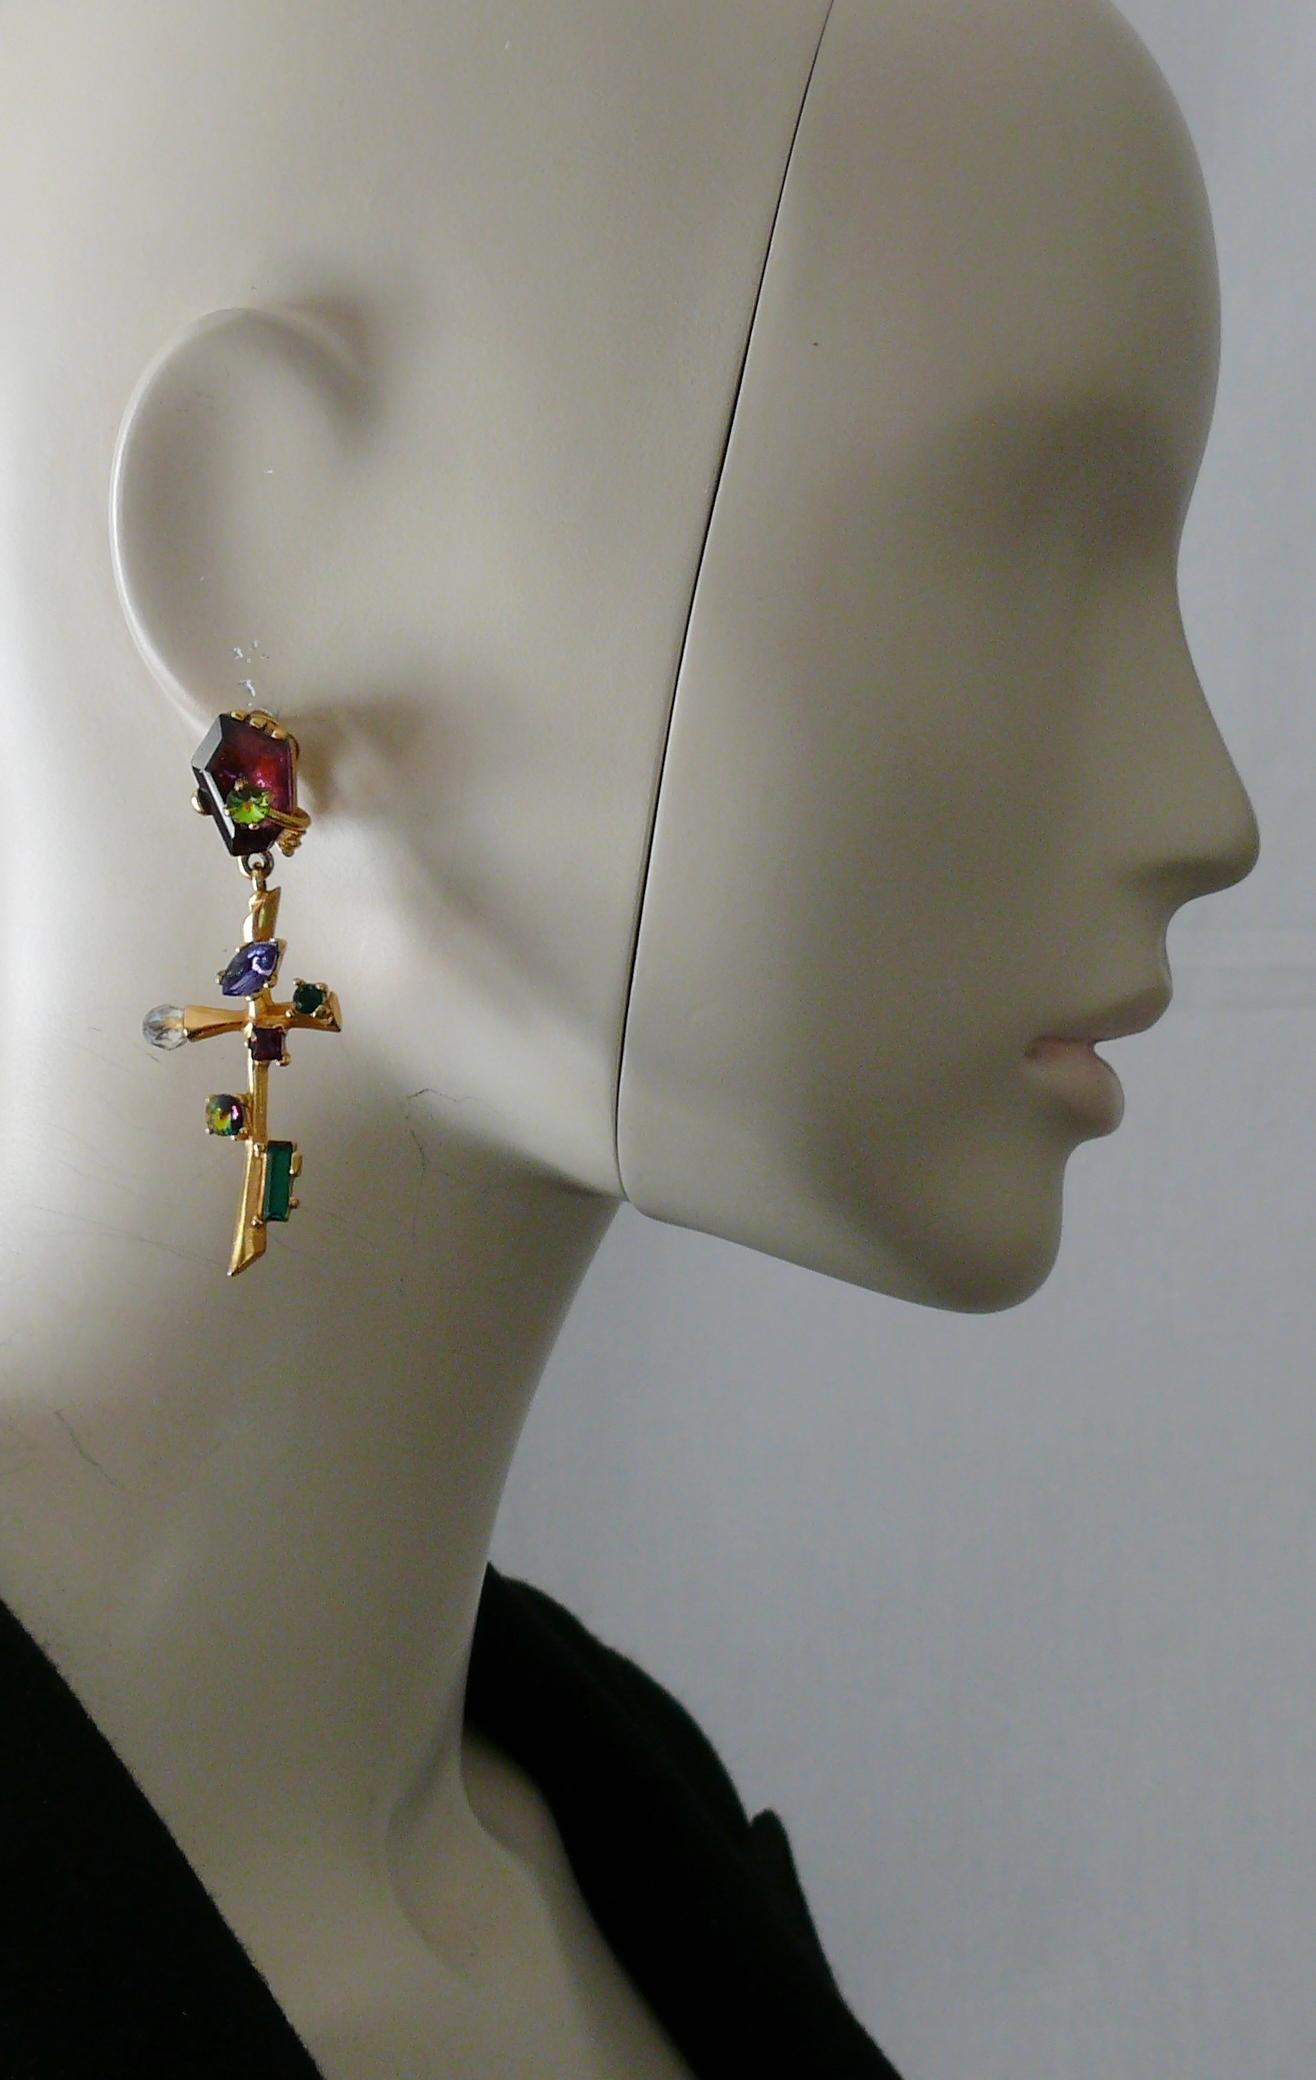 CHRISTIAN LACROIX vintage gold toned dangling earrings (clip-on) featuring an abstract cross embellished with multicolored crystals.

Marked CHRISTIAN LACROIX CL Made in France.

Indicative measurements : max. height approx. 6.8 cm (2.68 inches) /